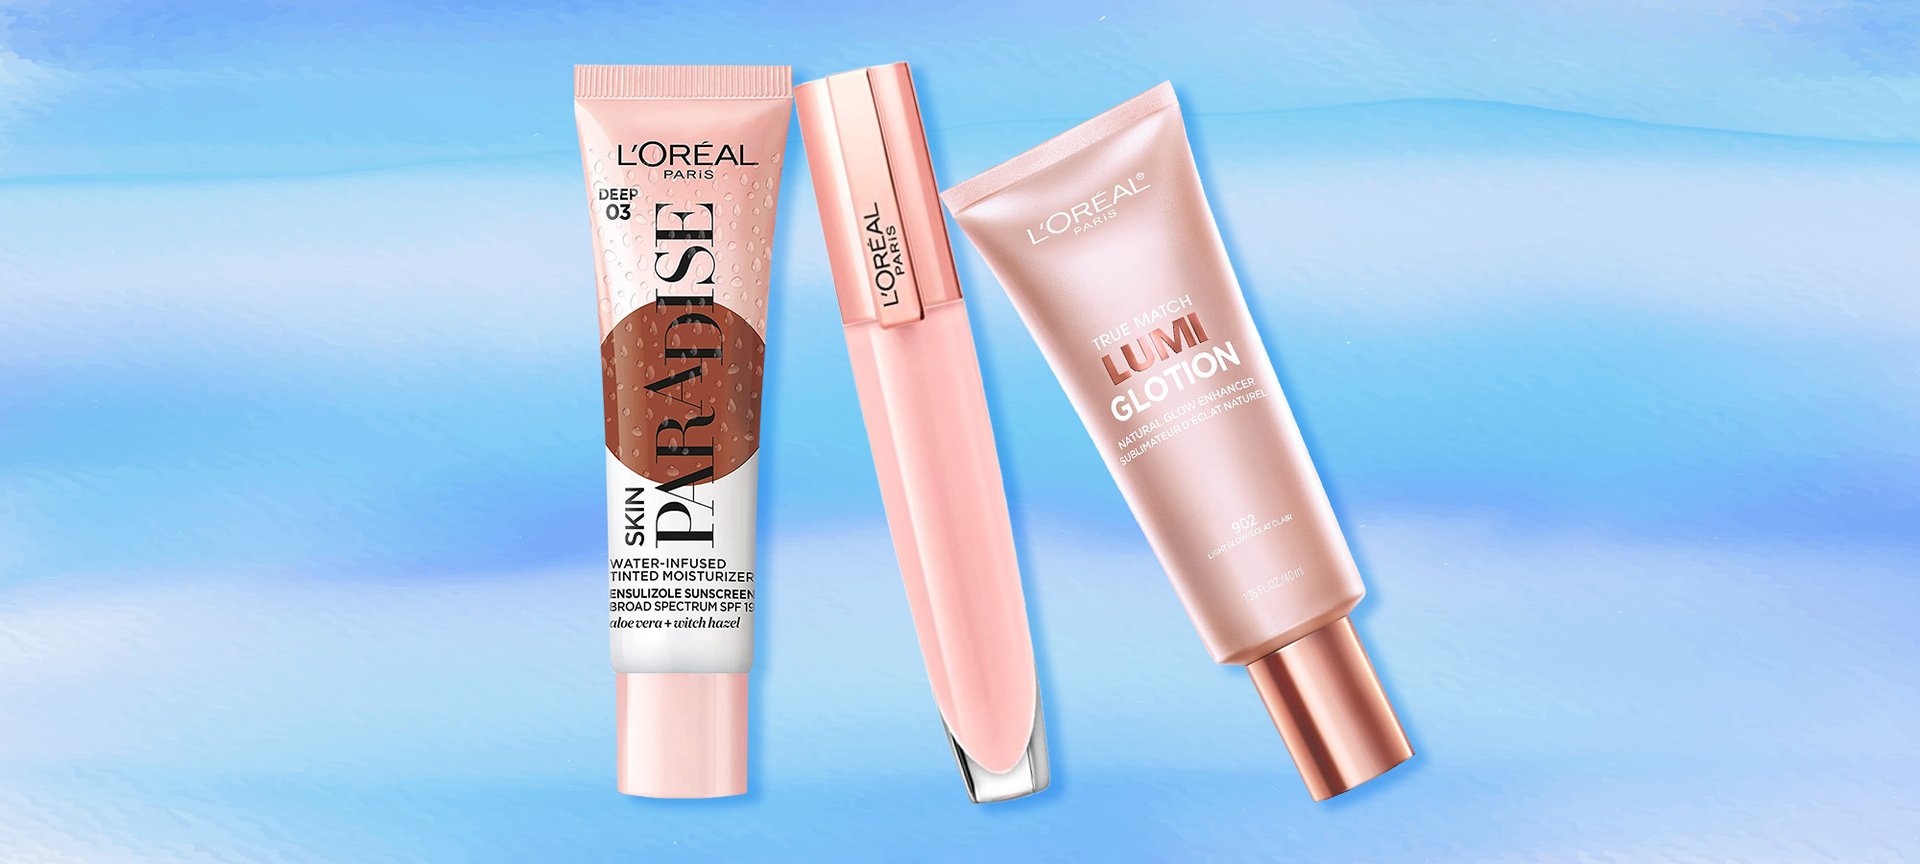 Hydrating Makeup Products For Dry Dehydrated Skin